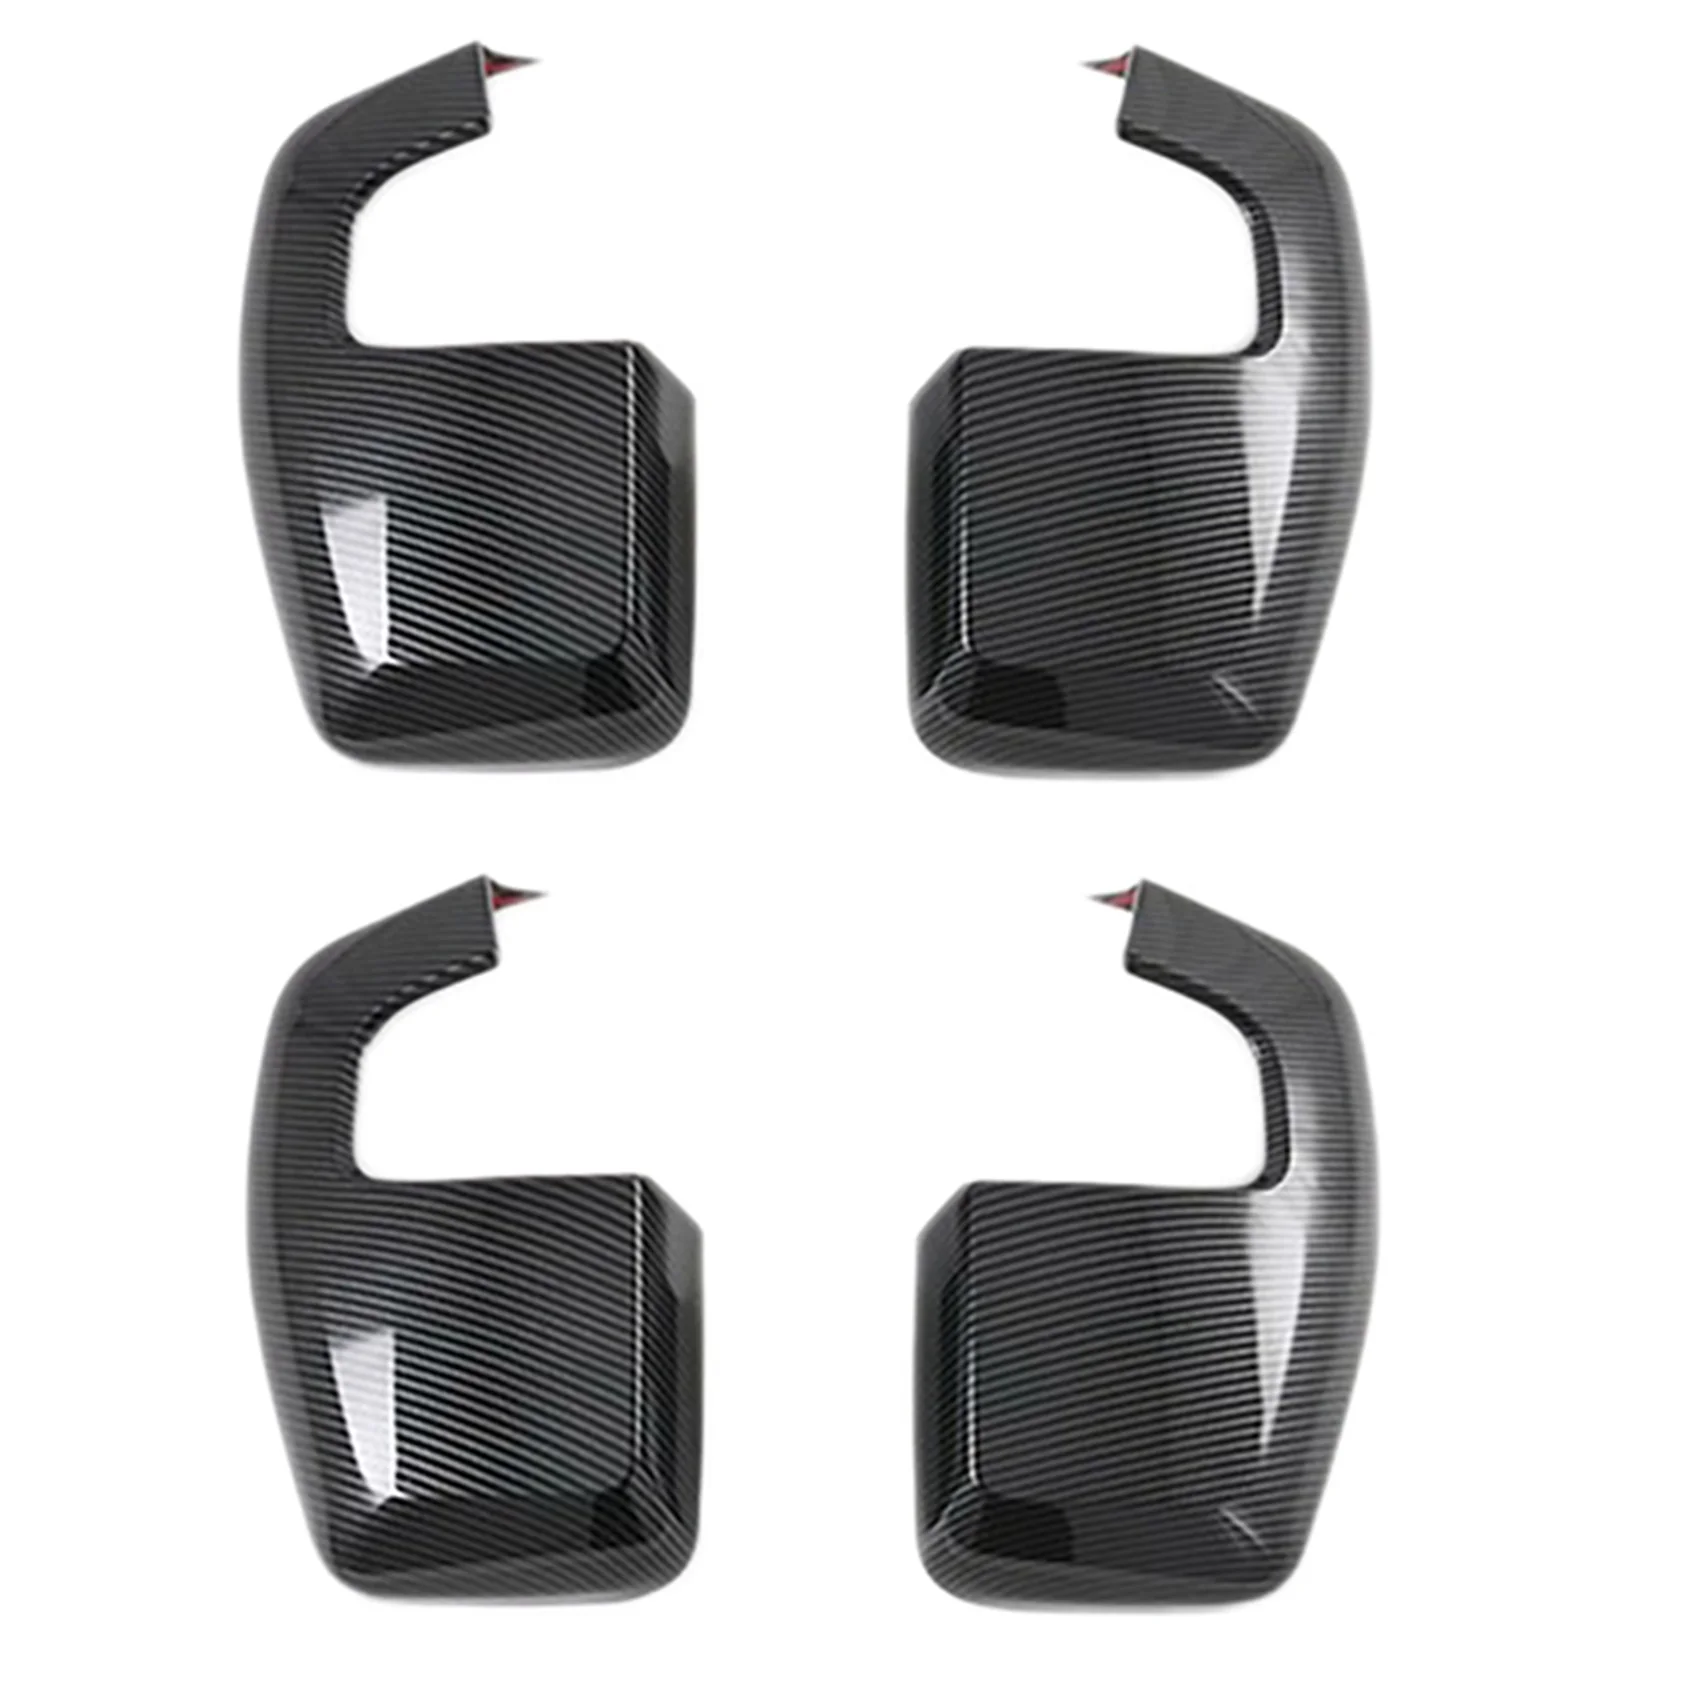 

2X Car Carbon Rear View Rearview Side Glass Mirror Cover Trim Side Mirror Caps for Ford Transit 2017 Tourneo Custom 2016